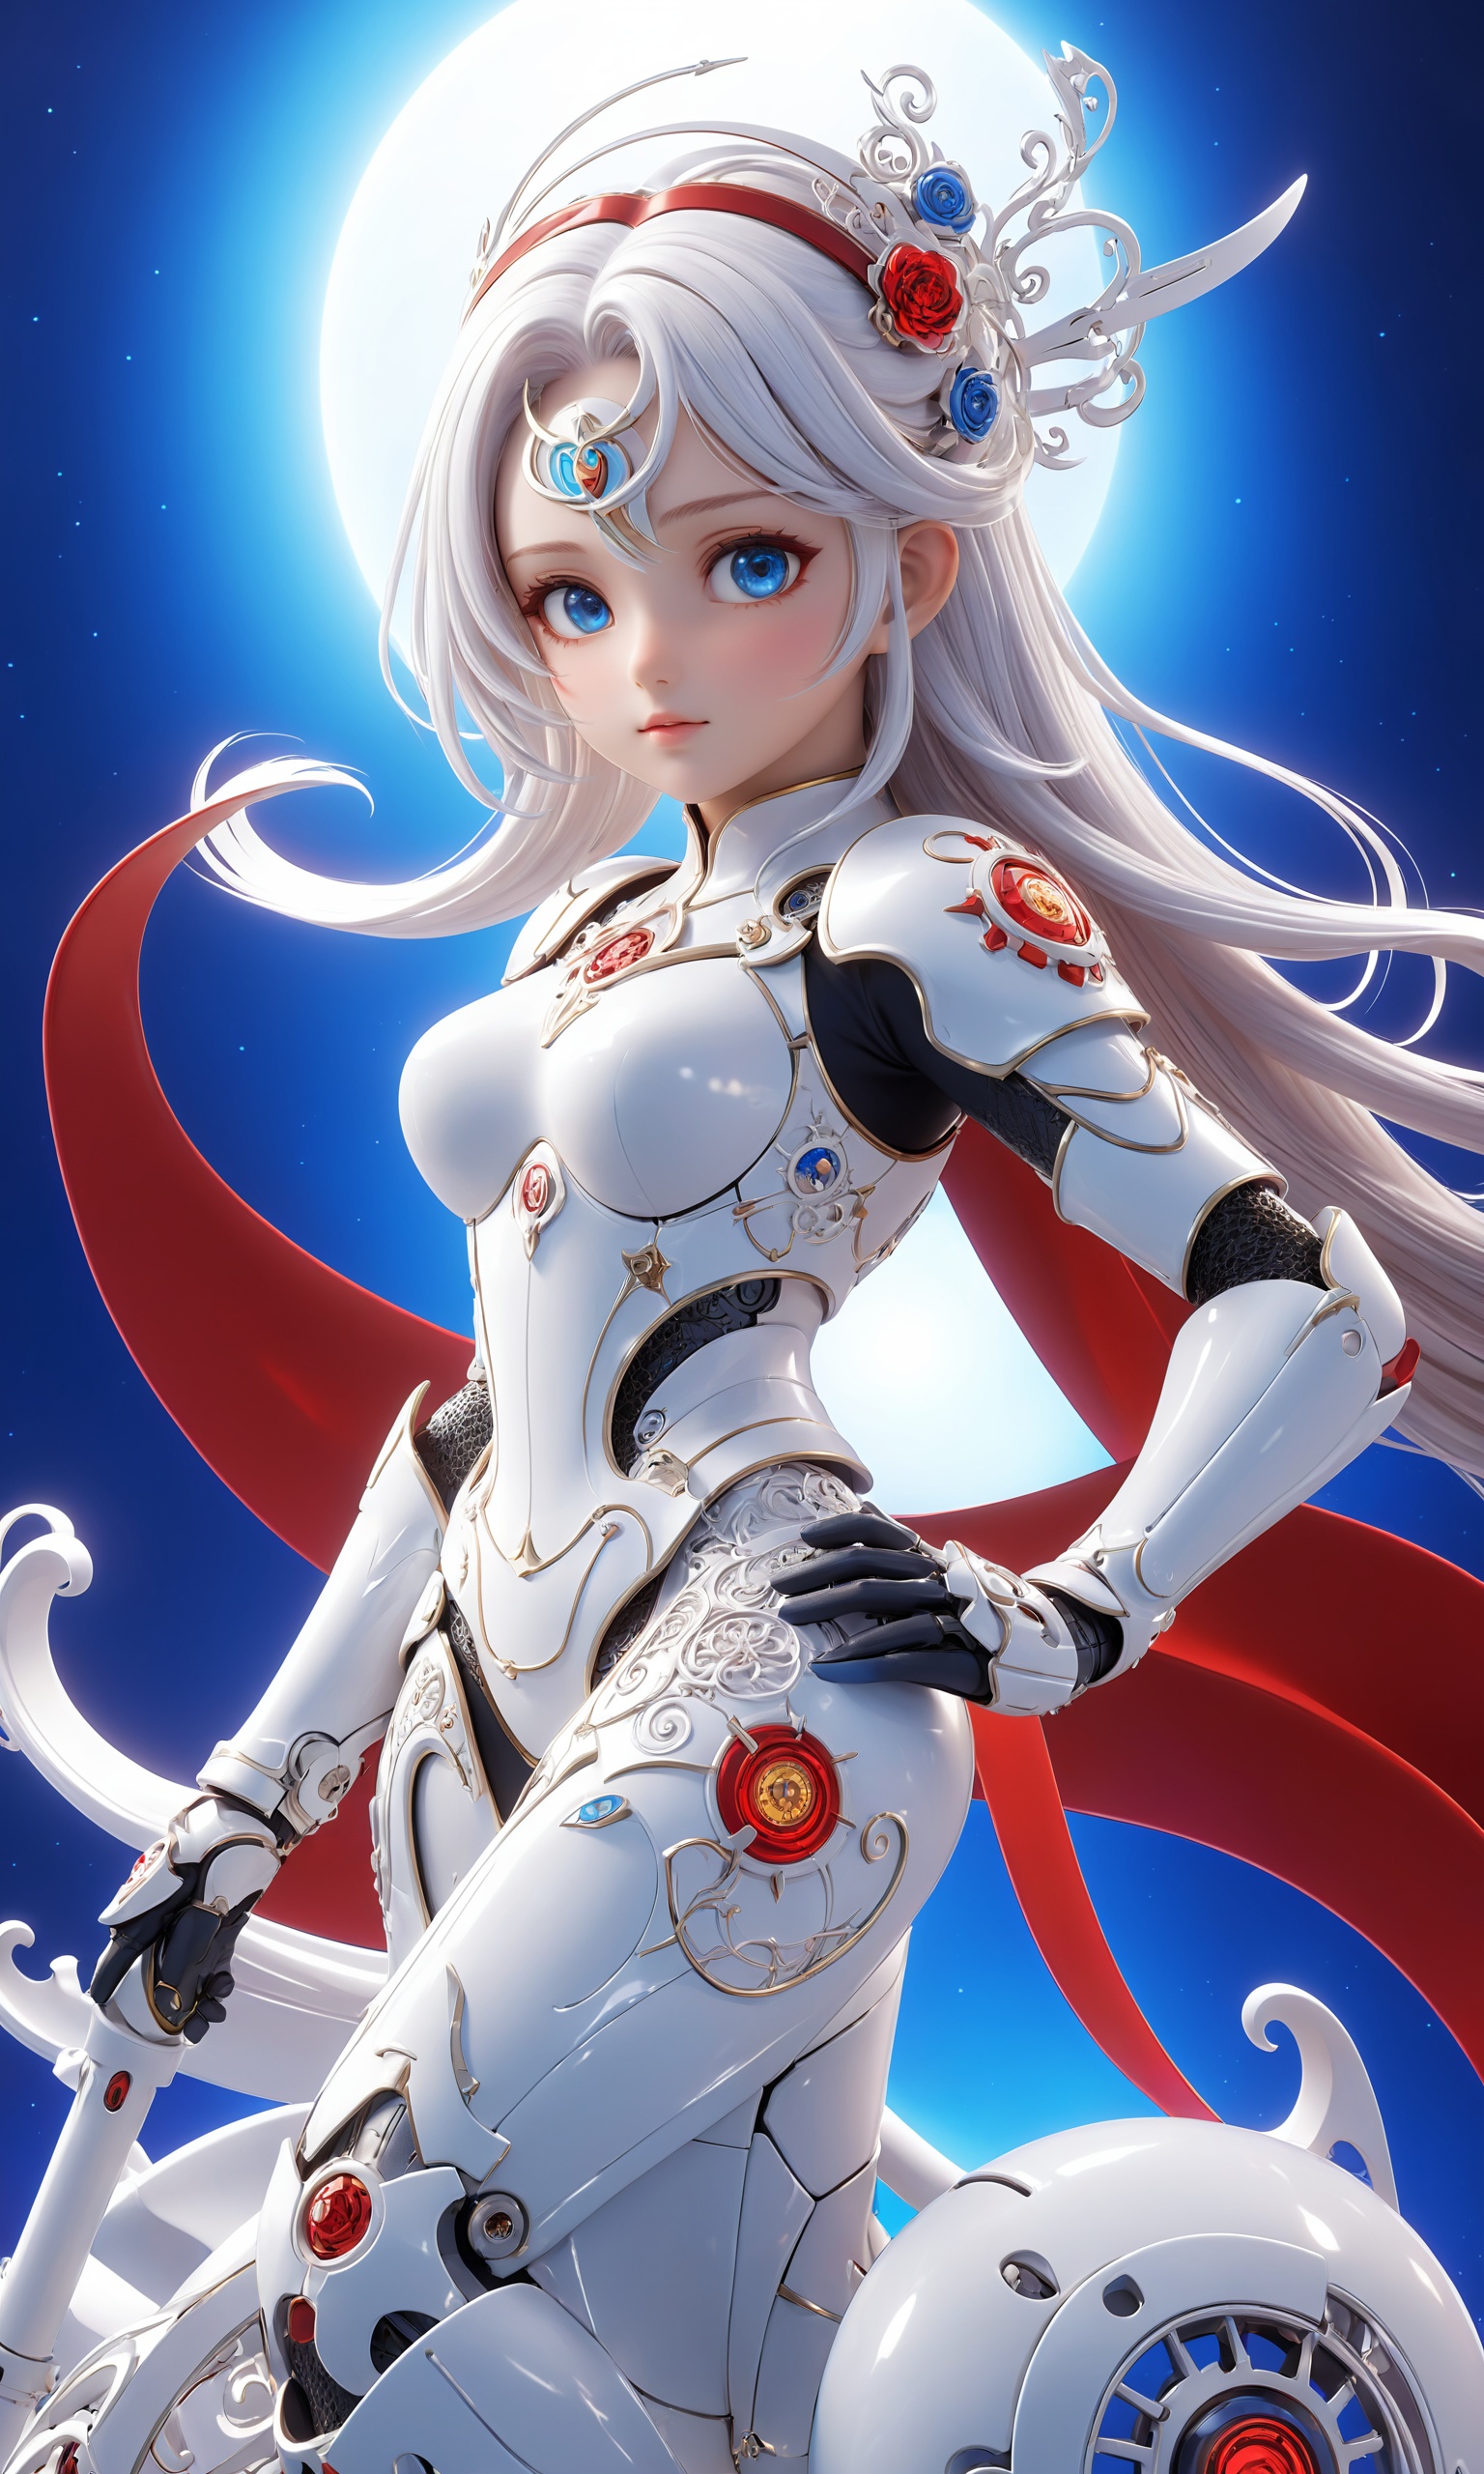 professional 3d model,anime artwork pixar,3d style,good shine,OC rendering,highly detailed,volumetric,dramatic lighting,front_view,(1girl,looking at viewer),long white hair,mechanical white armor,intricate armor,delicate blue filigree,intricate filigree,red metalic parts,detailed part,dynamic pose,beautiful colorful background,very beautiful,masterpiece,best quality,super detail,anime style,key visual,vibrant,studio anime